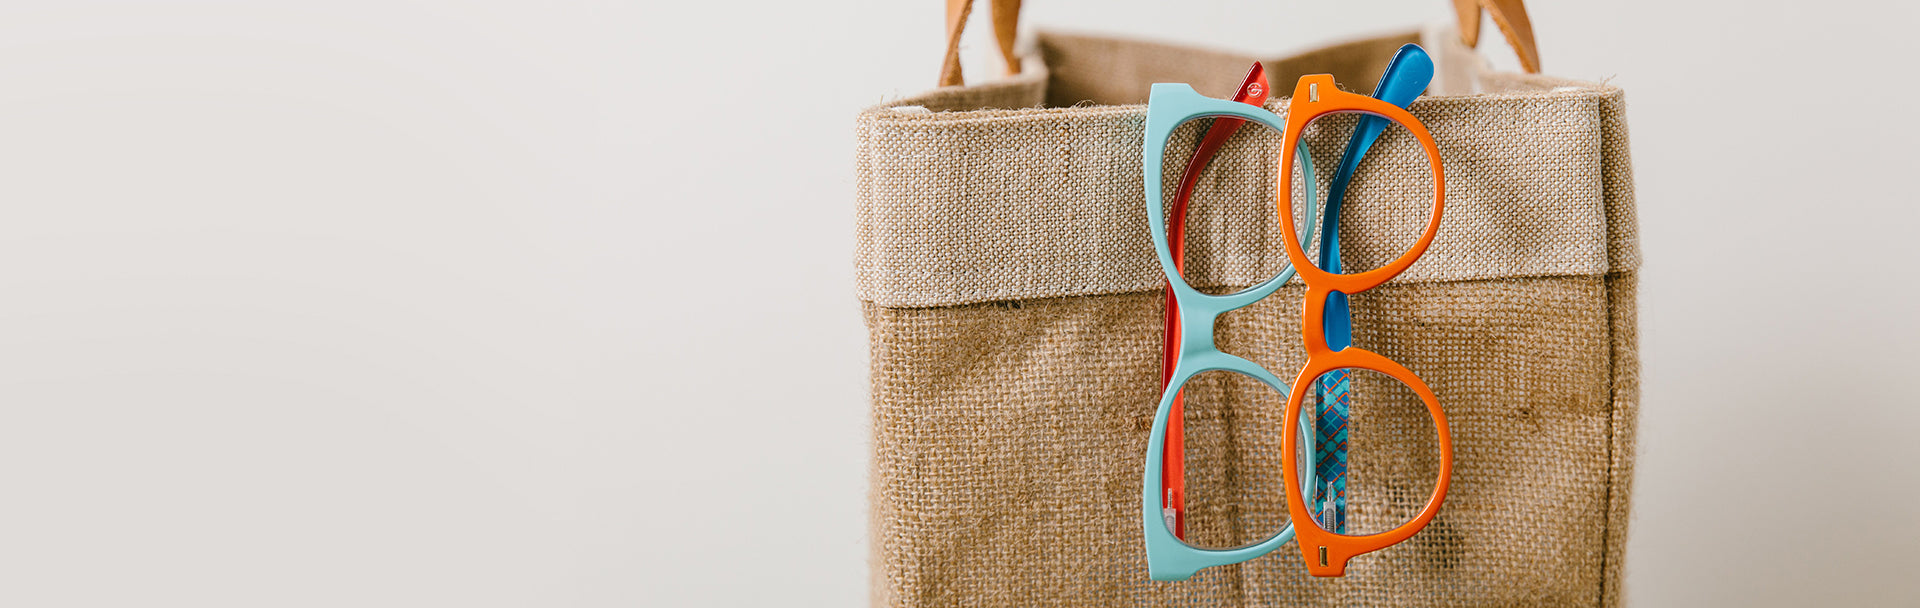 Peepers Reading Glasses Hung Over Side Of Bag